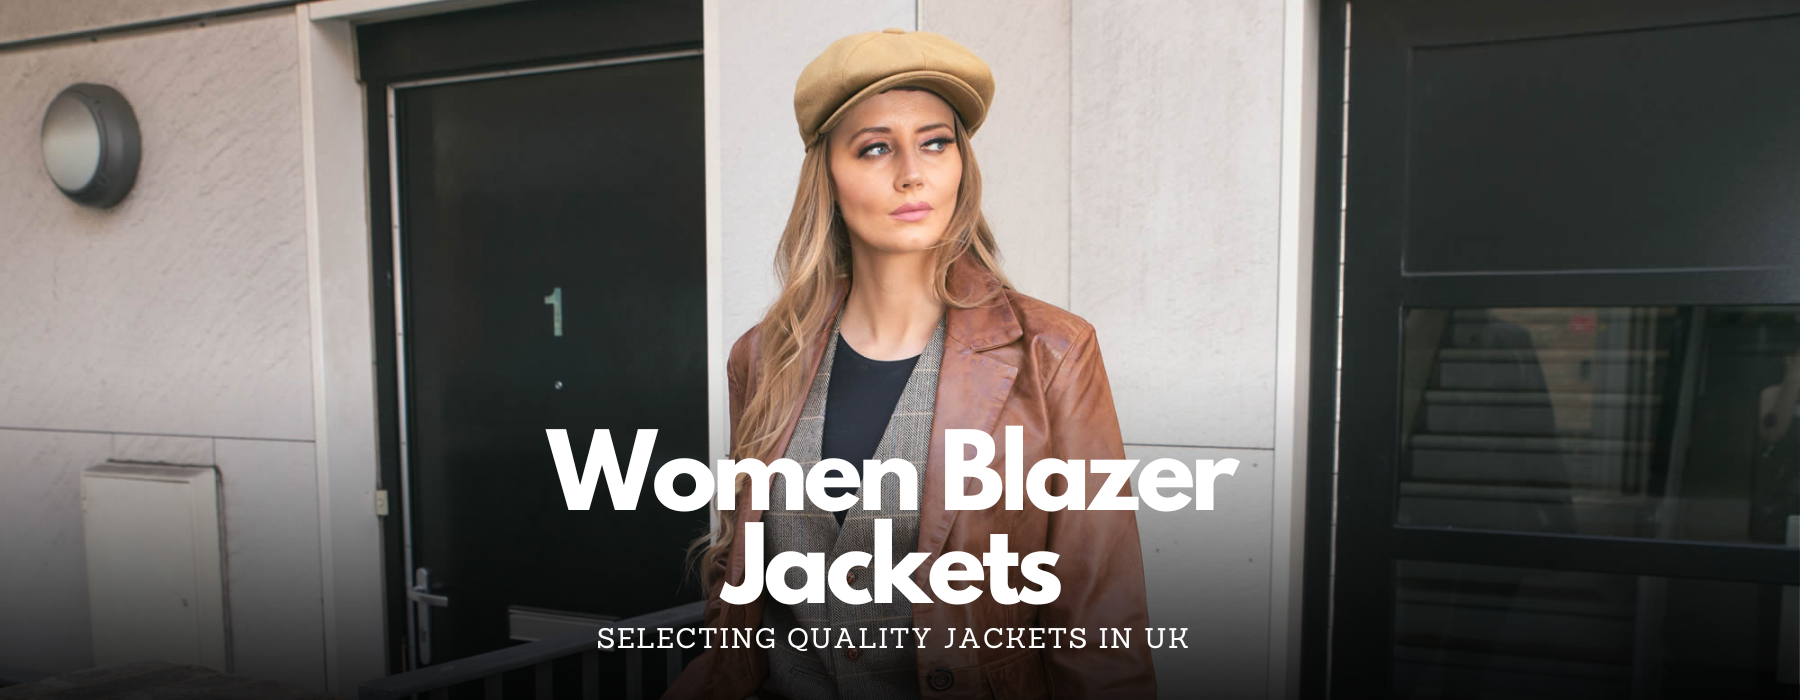 Investment Pieces: Selecting Quality Women's Blazer Jackets in UK